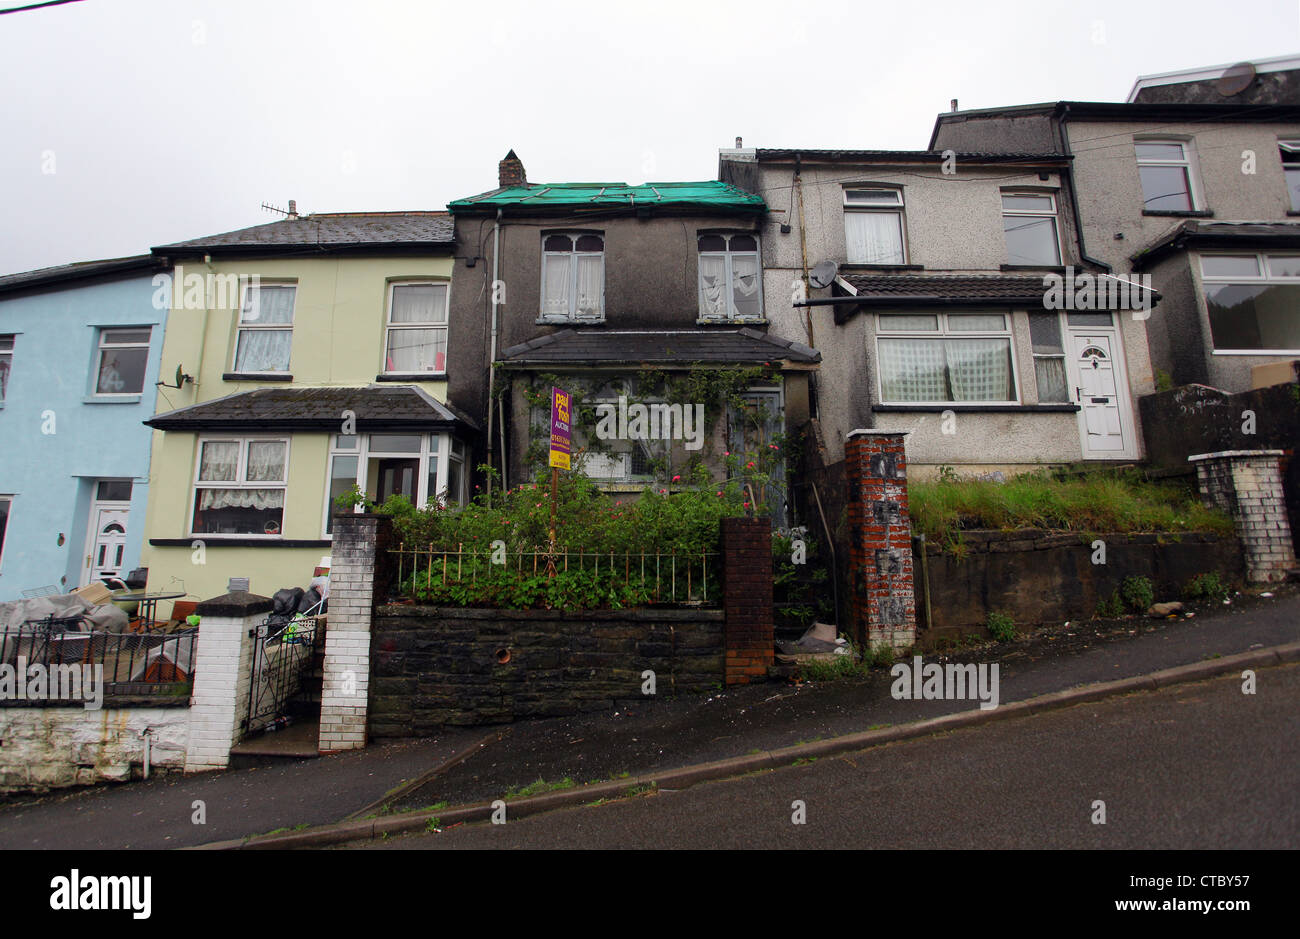 House for sale in Oak Street,Tonypandy,south Wales which has a starting price of only £4000 by auction by John Fosh Estate Agent Stock Photo